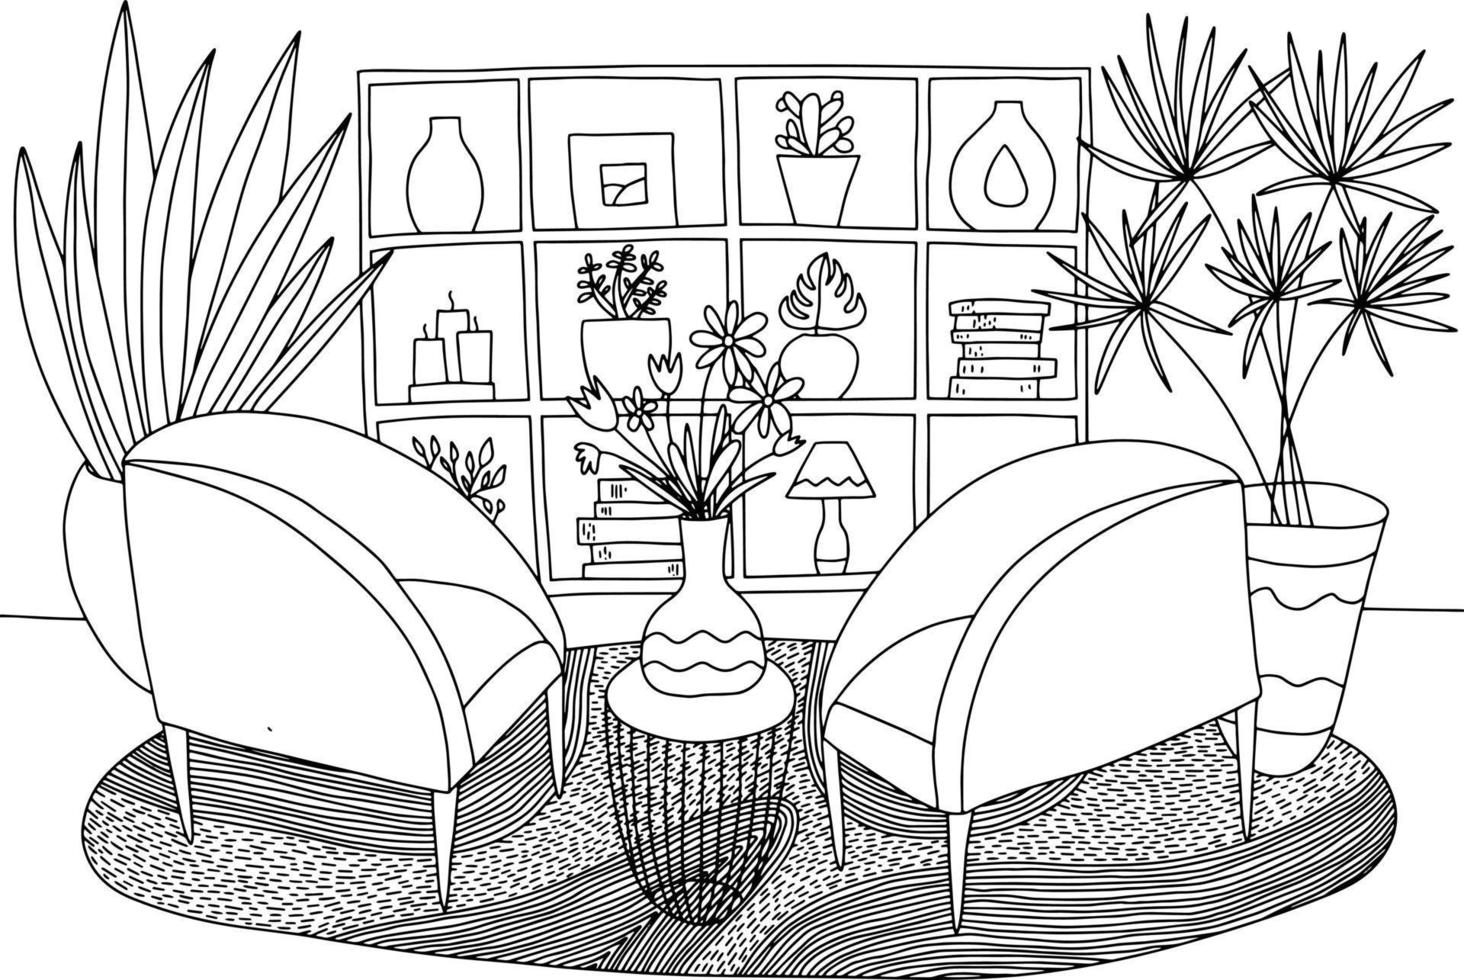 Living Room Interior Coloring Page Cozy Vector Design For Children And S 12253022 Art At Vecy